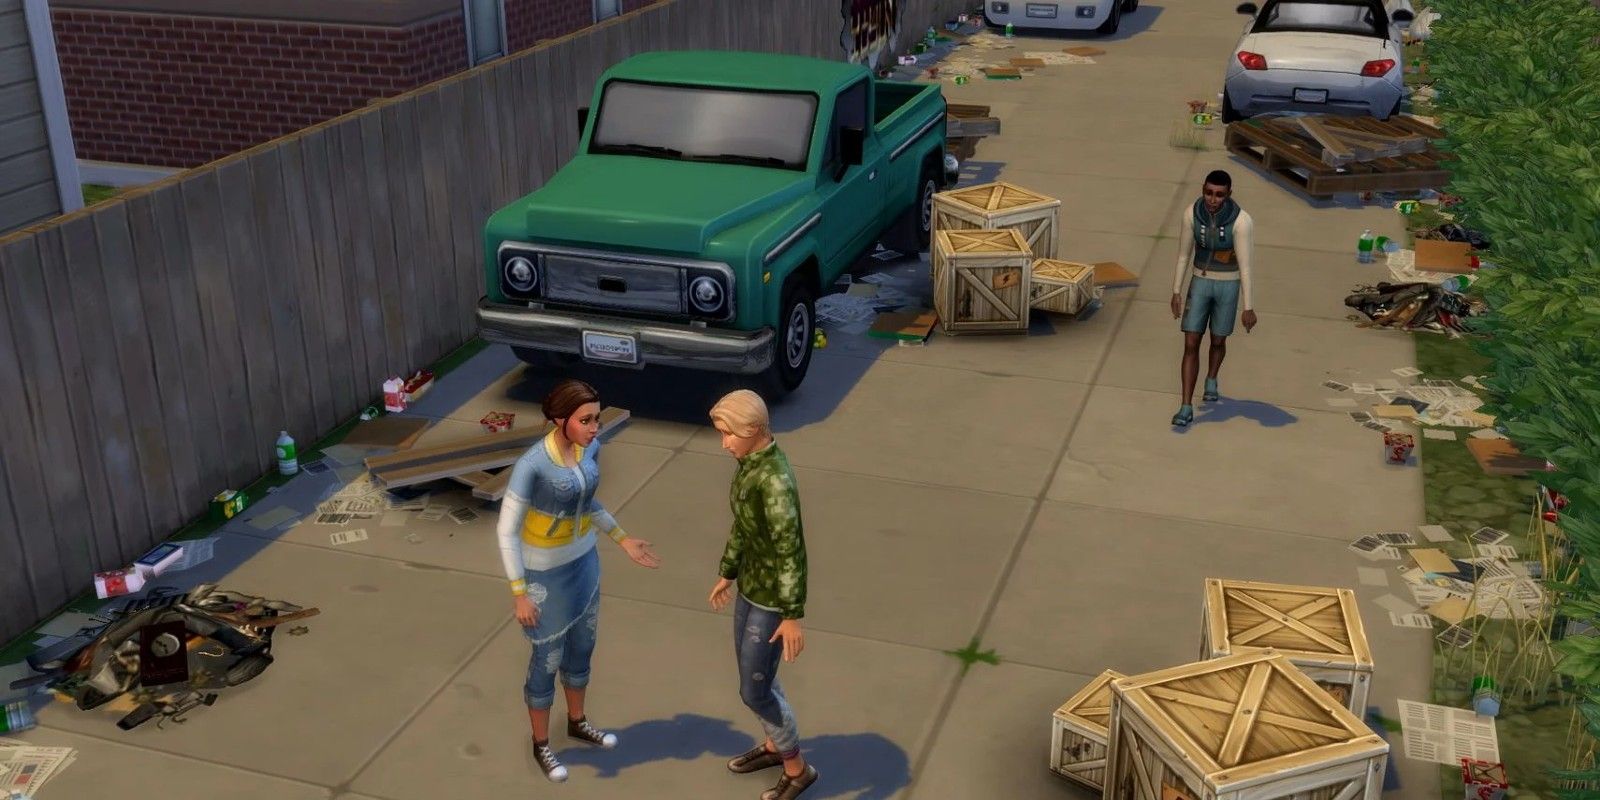 Two Sims stand in an alleyway with litter and talk in The Sims 4 Eco Lifestyle